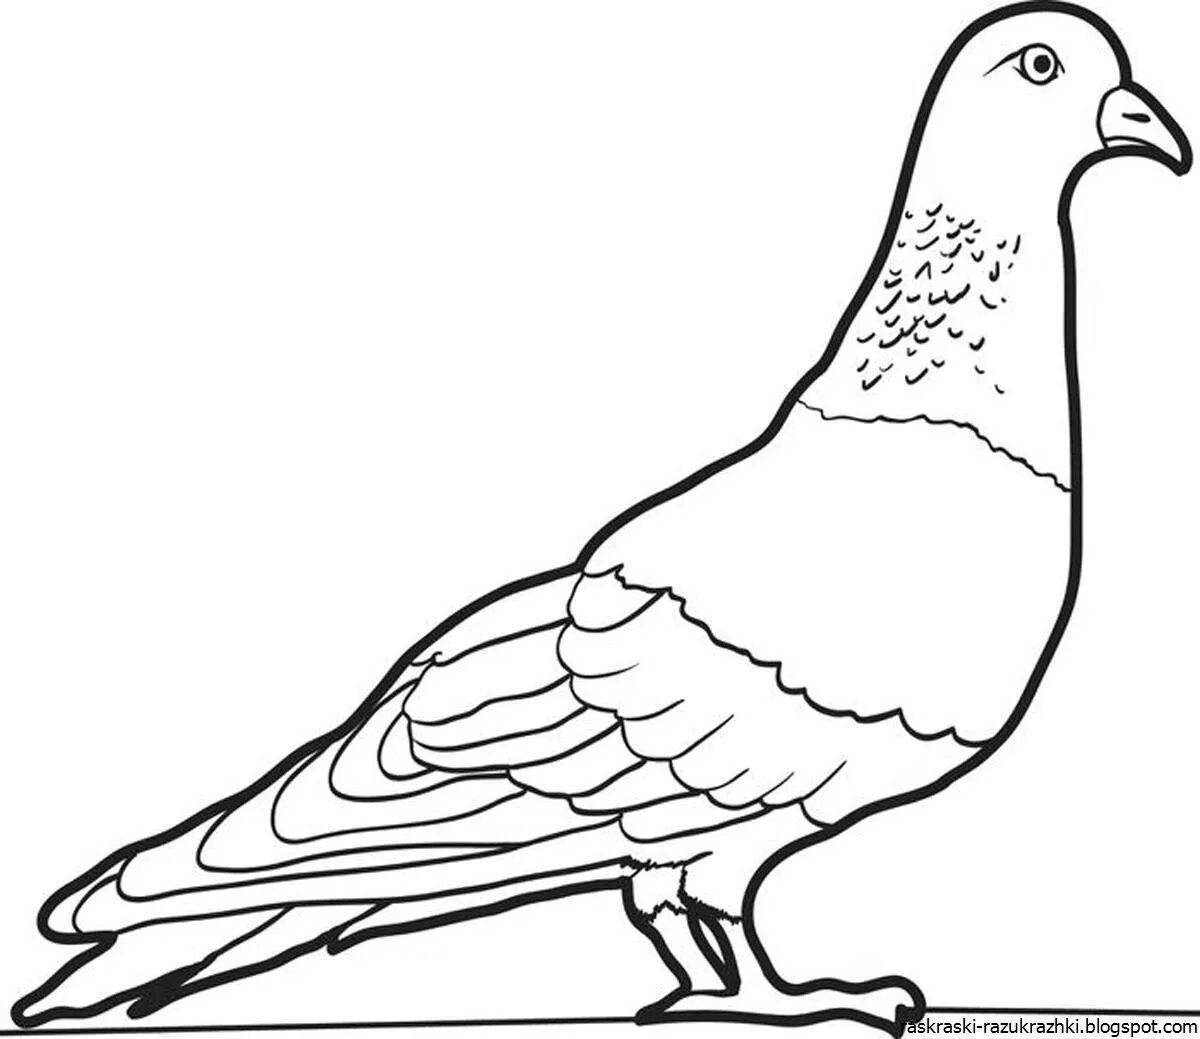 Glorious coloring dove for children 3-4 years old